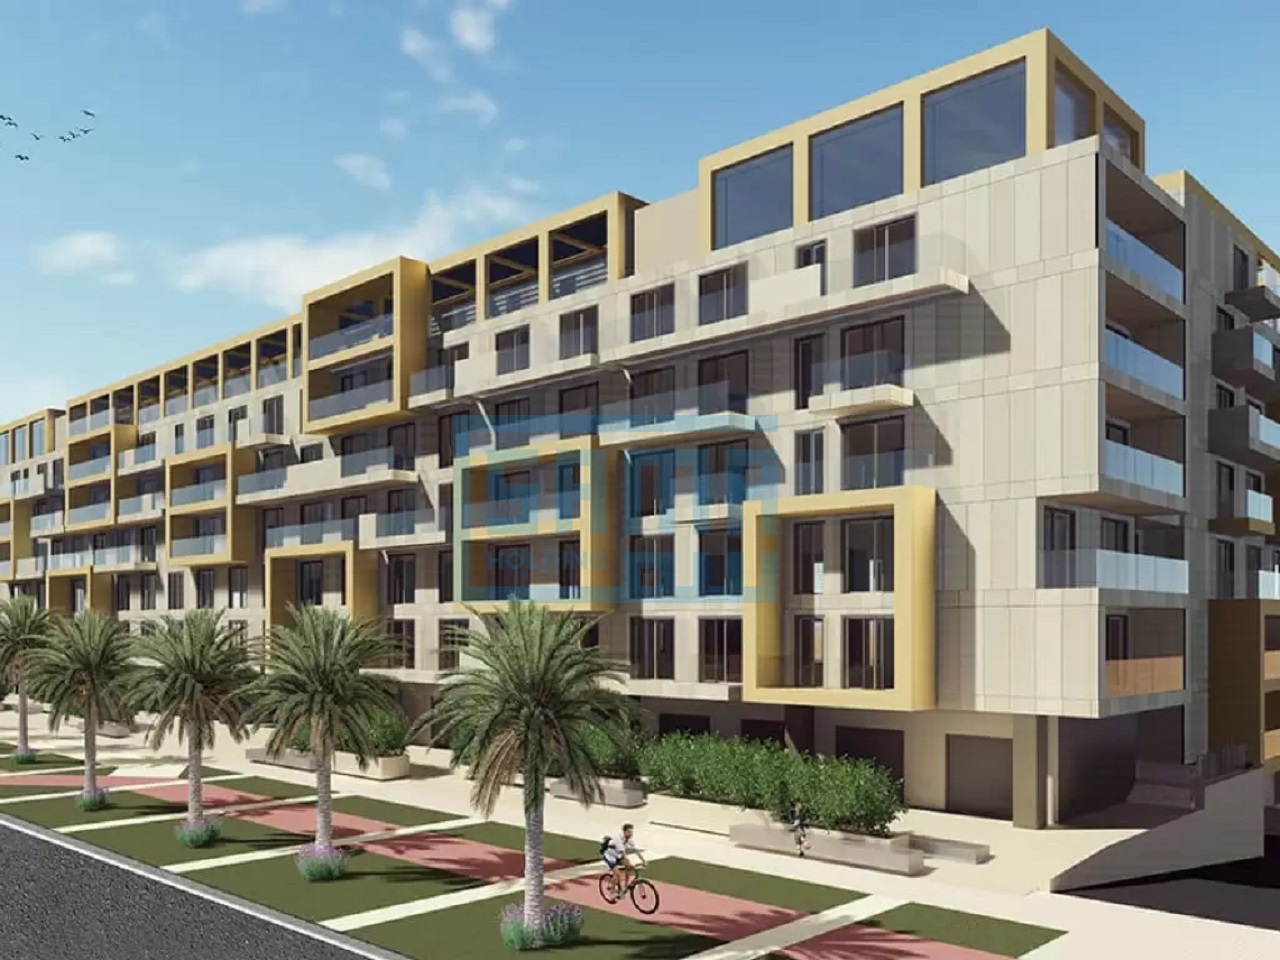 Luxurious 3 Bedrooms plus Roof Residential Unit for Sale in Al Raha Beach under Al Raha Lofts 2 Project, Abu Dhabi